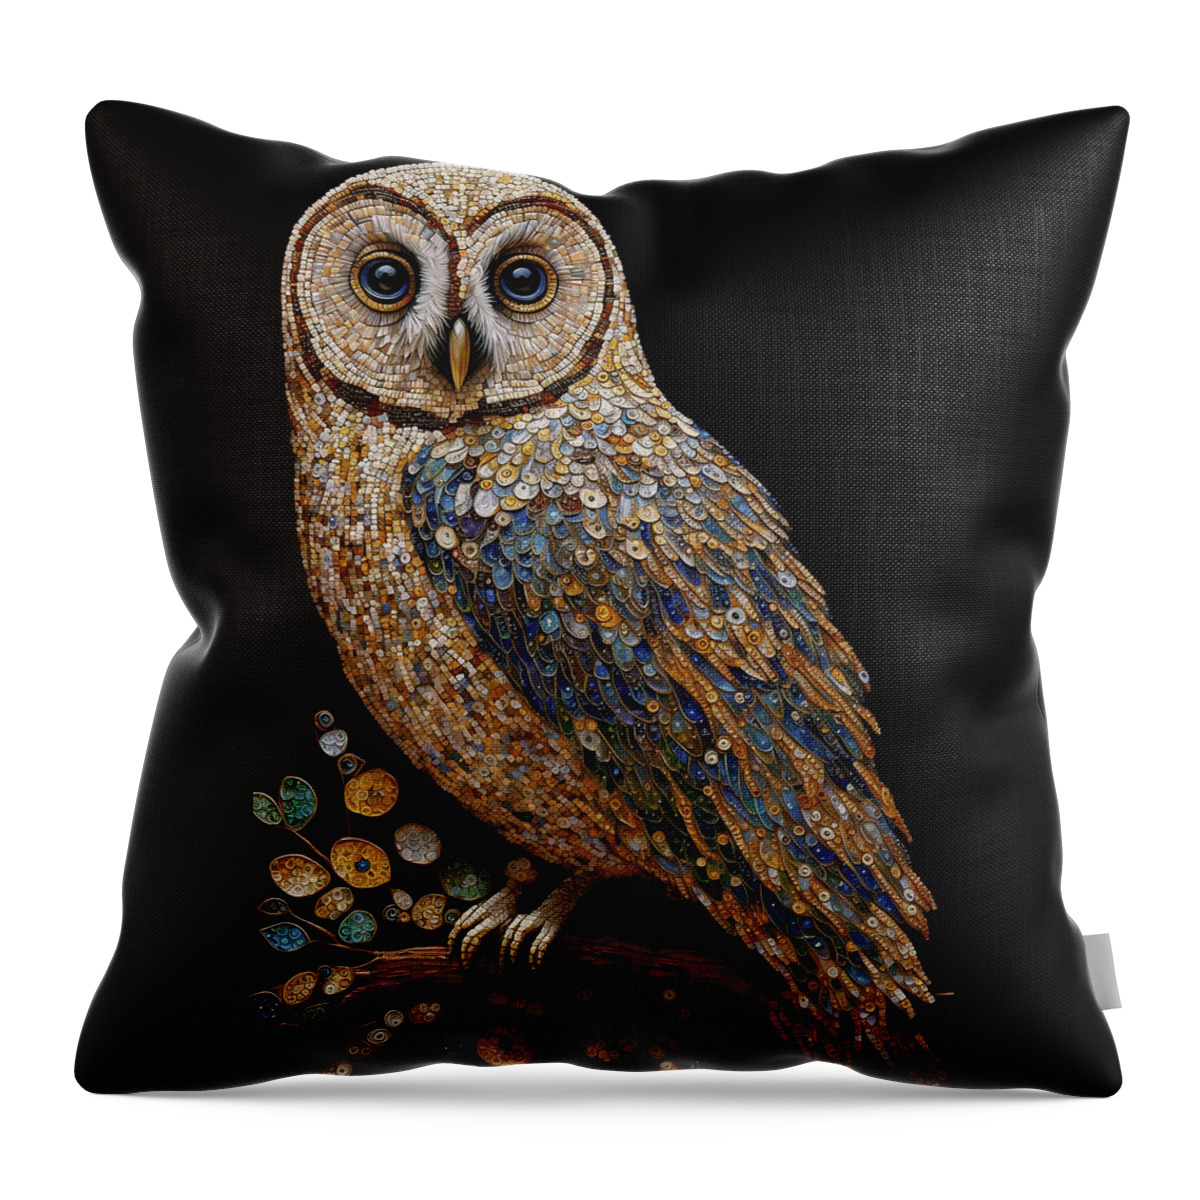 Owls Throw Pillow featuring the digital art Mosaic Owl by Peggy Collins